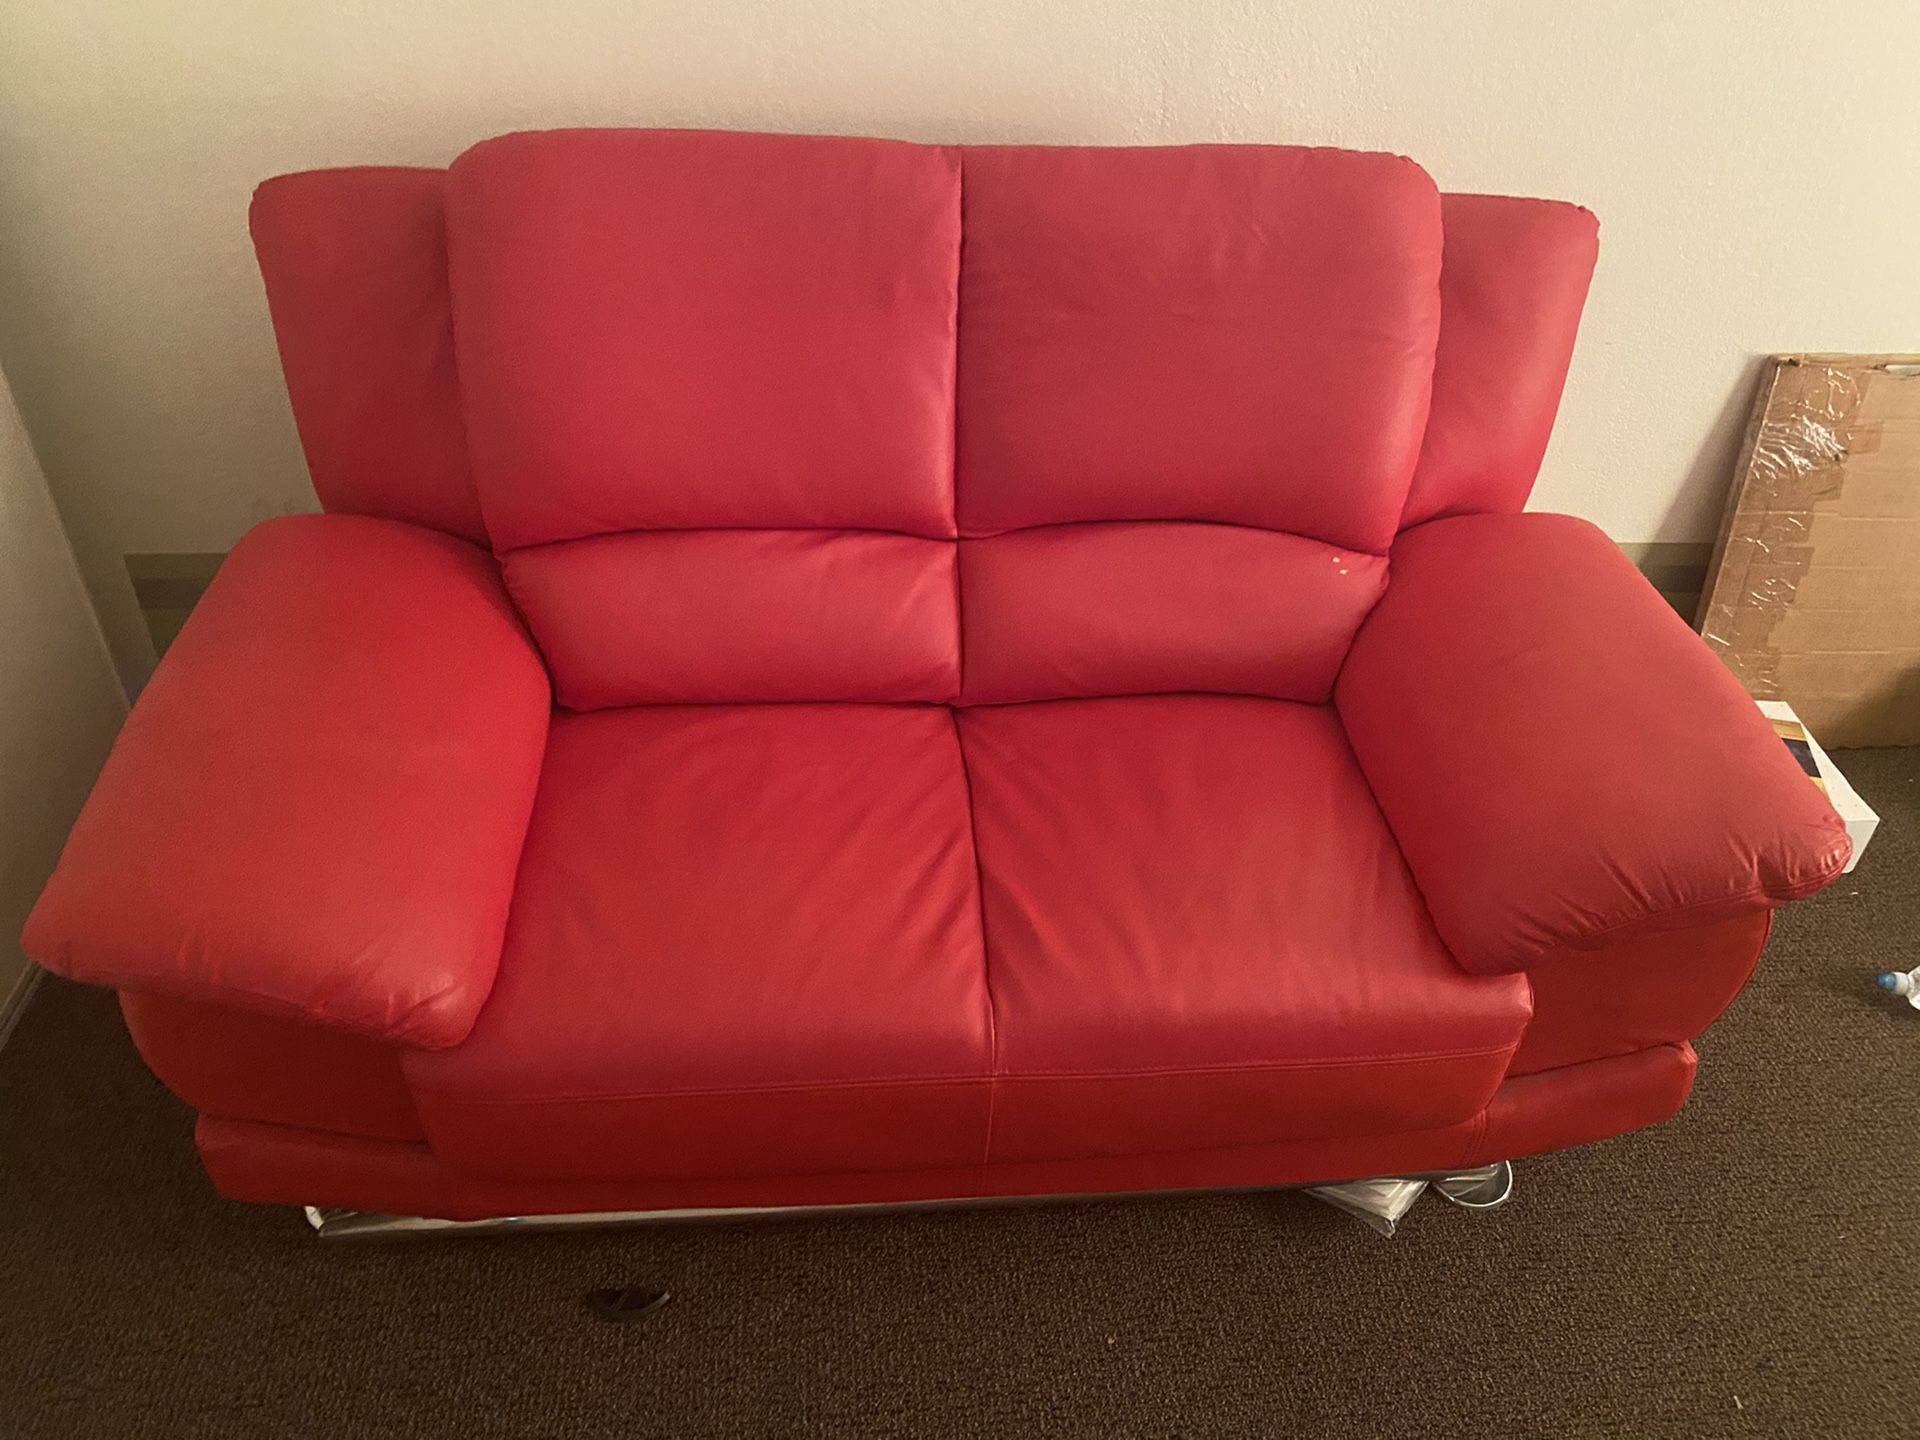 Full couch and matching chairs - red leather sofa and seats